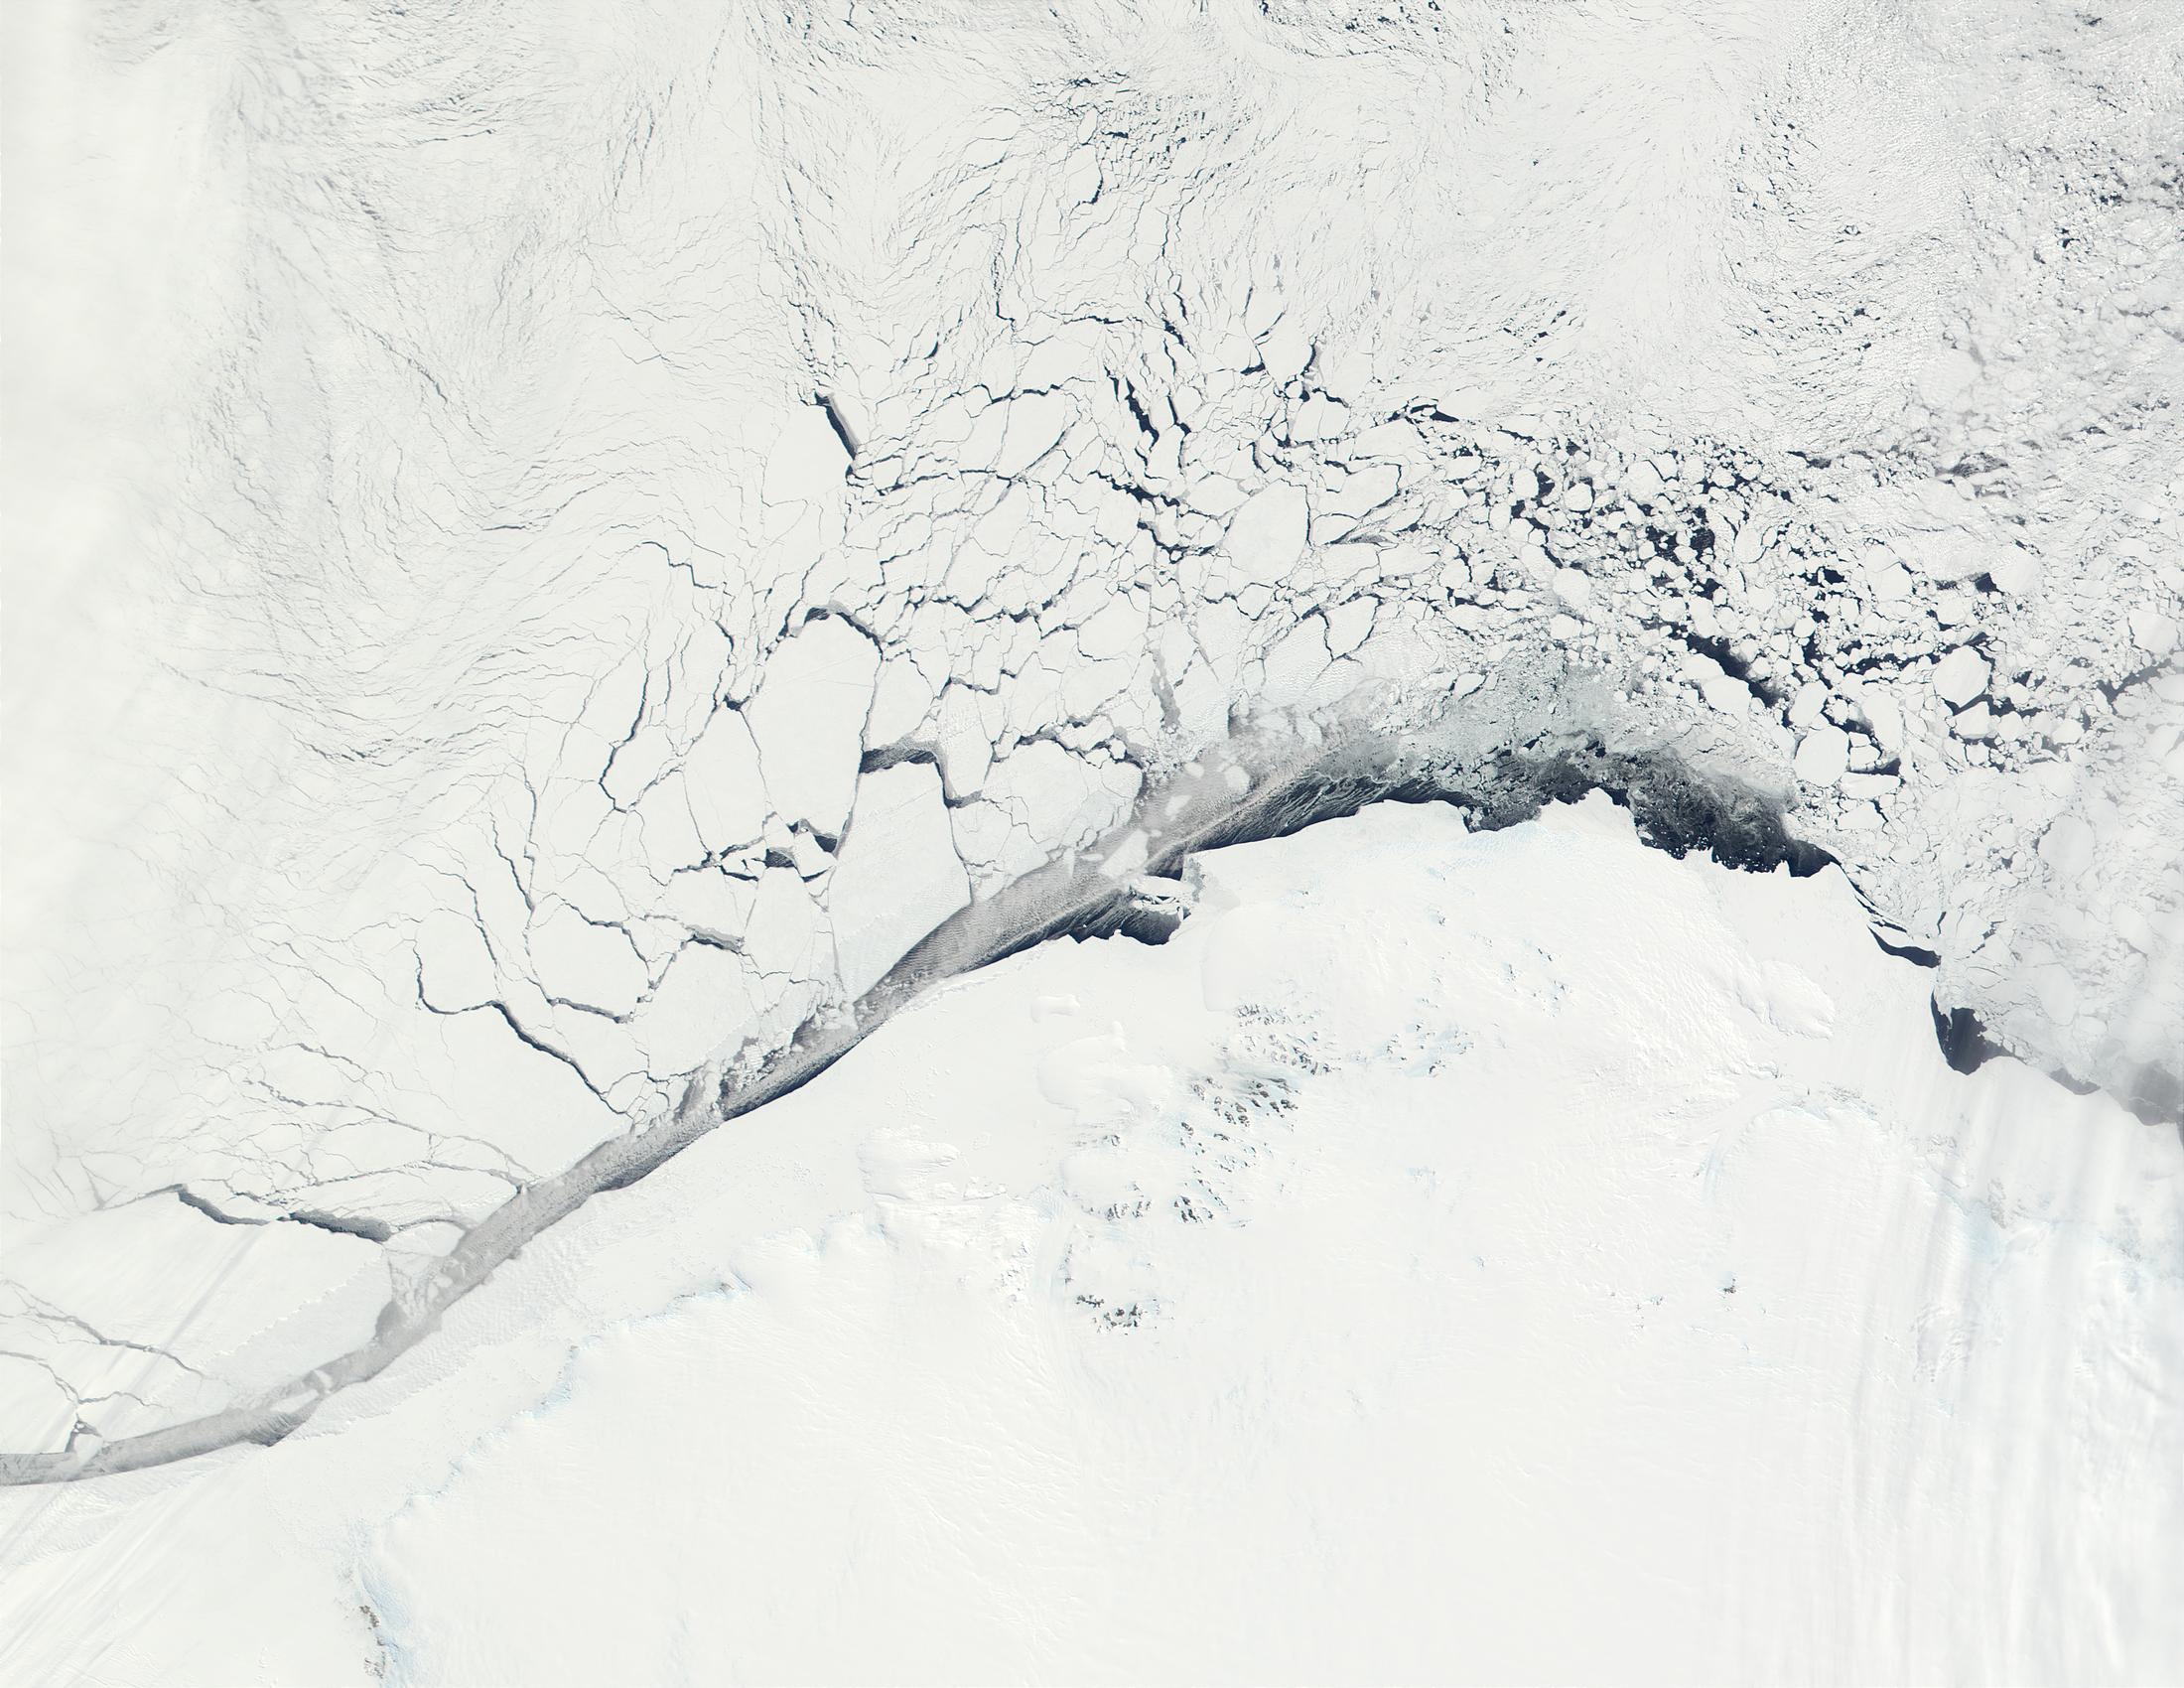 Prince Olav Coast, Enderby Land, and Kemp Coast, Antarctica - related image preview